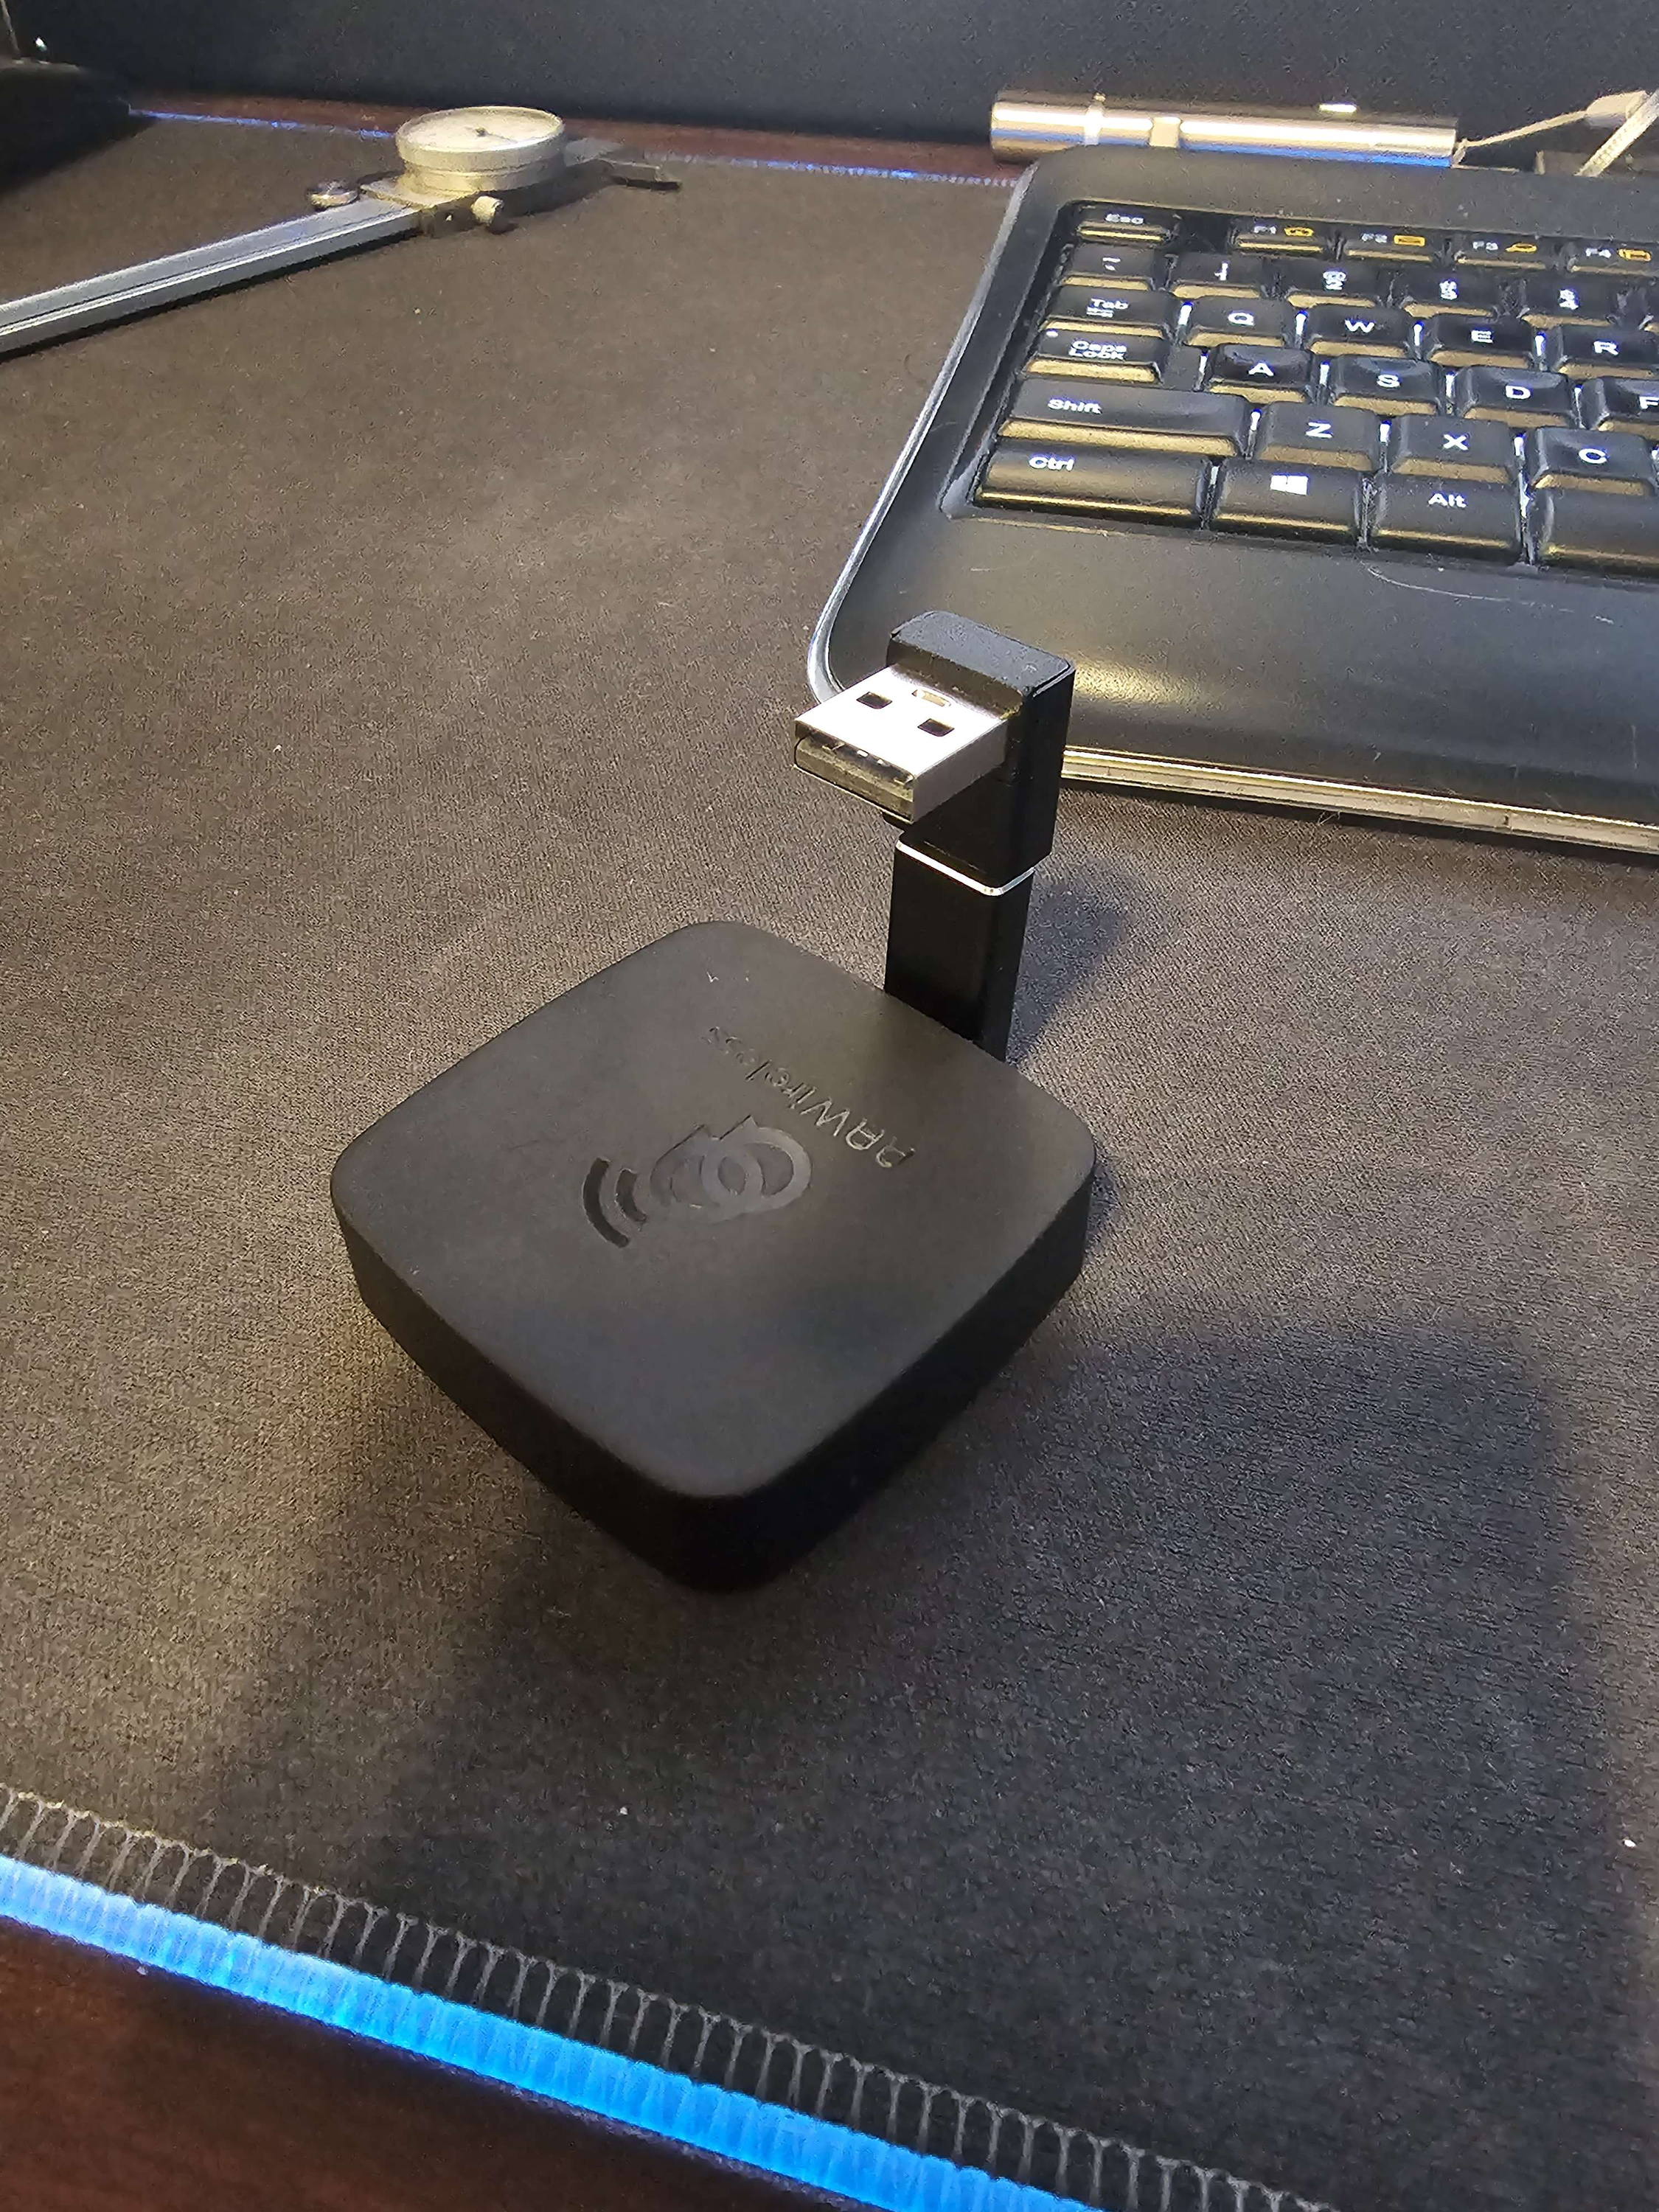 This Android Auto wireless adapter works well